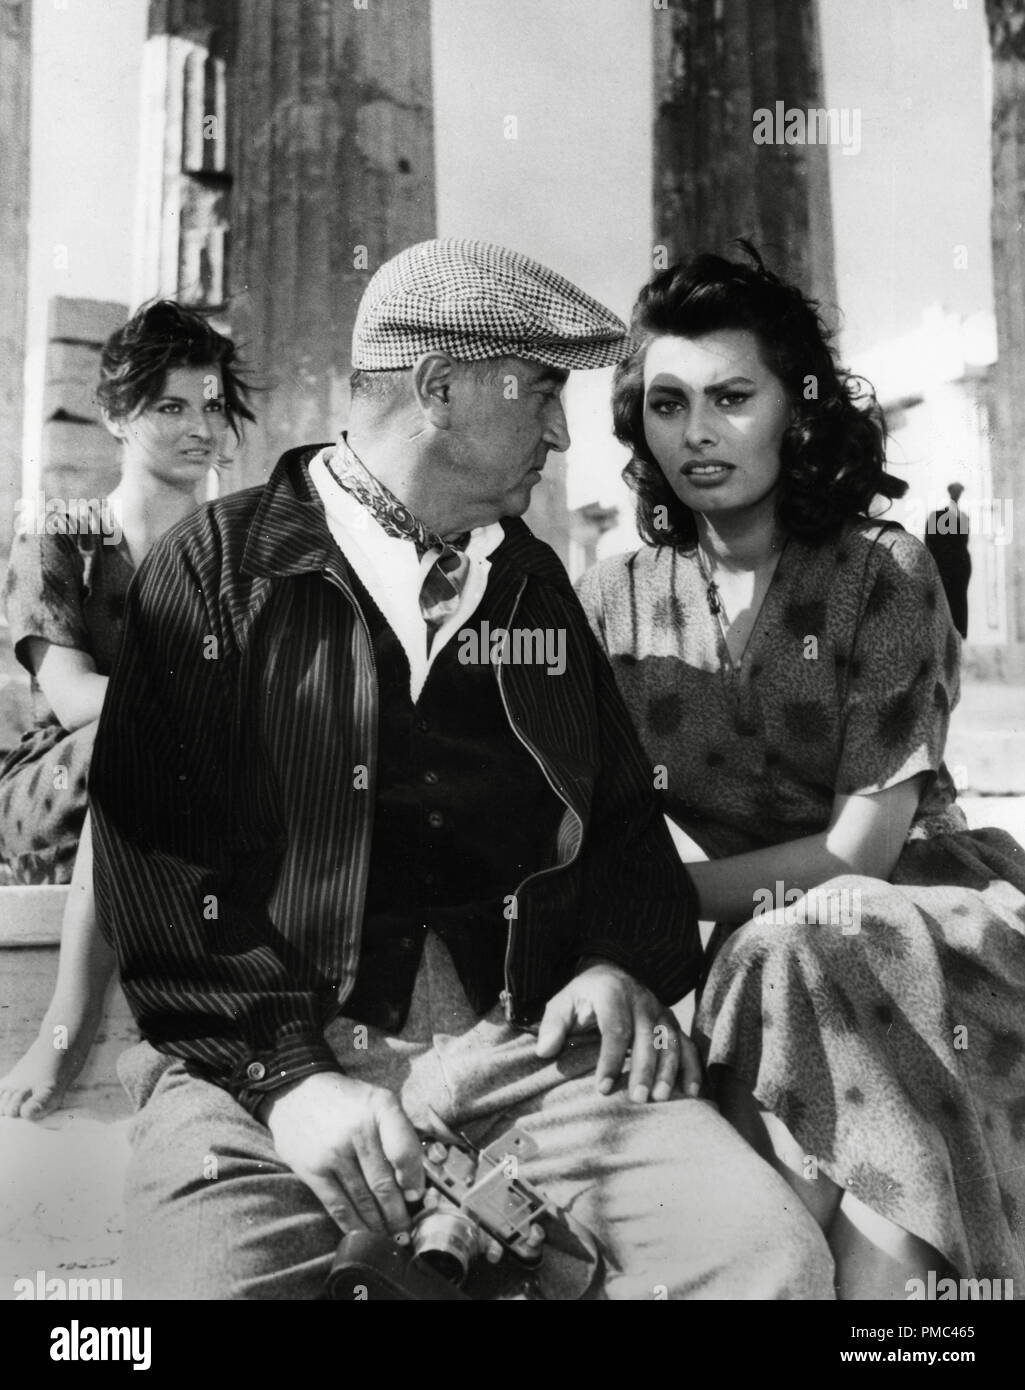 Sophia Loren on location in Greece during the making of, 'Boy on a Dolphin' 1957 20th Century Fox File Reference # 33536 110THA Stock Photo